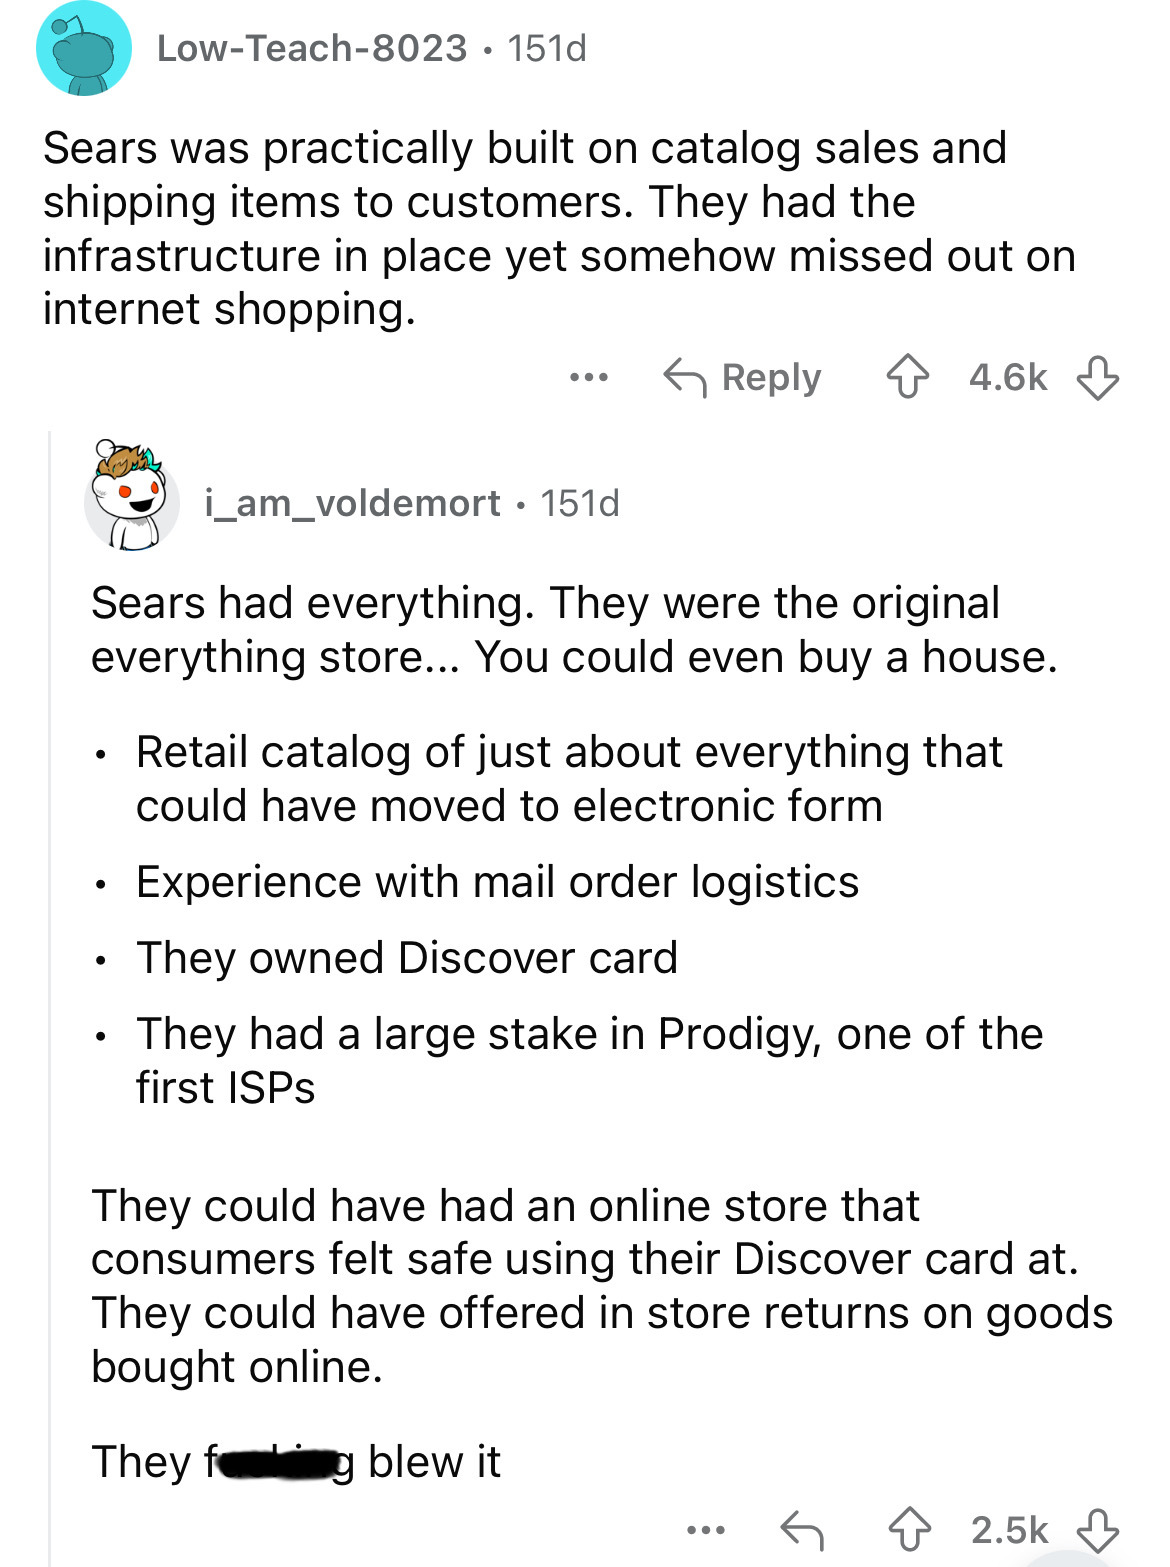 document - LowTeach8023 151d Sears was practically built on catalog sales and shipping items to customers. They had the infrastructure in place yet somehow missed out on internet shopping. i_am_voldemort. 151d Sears had everything. They were the original 